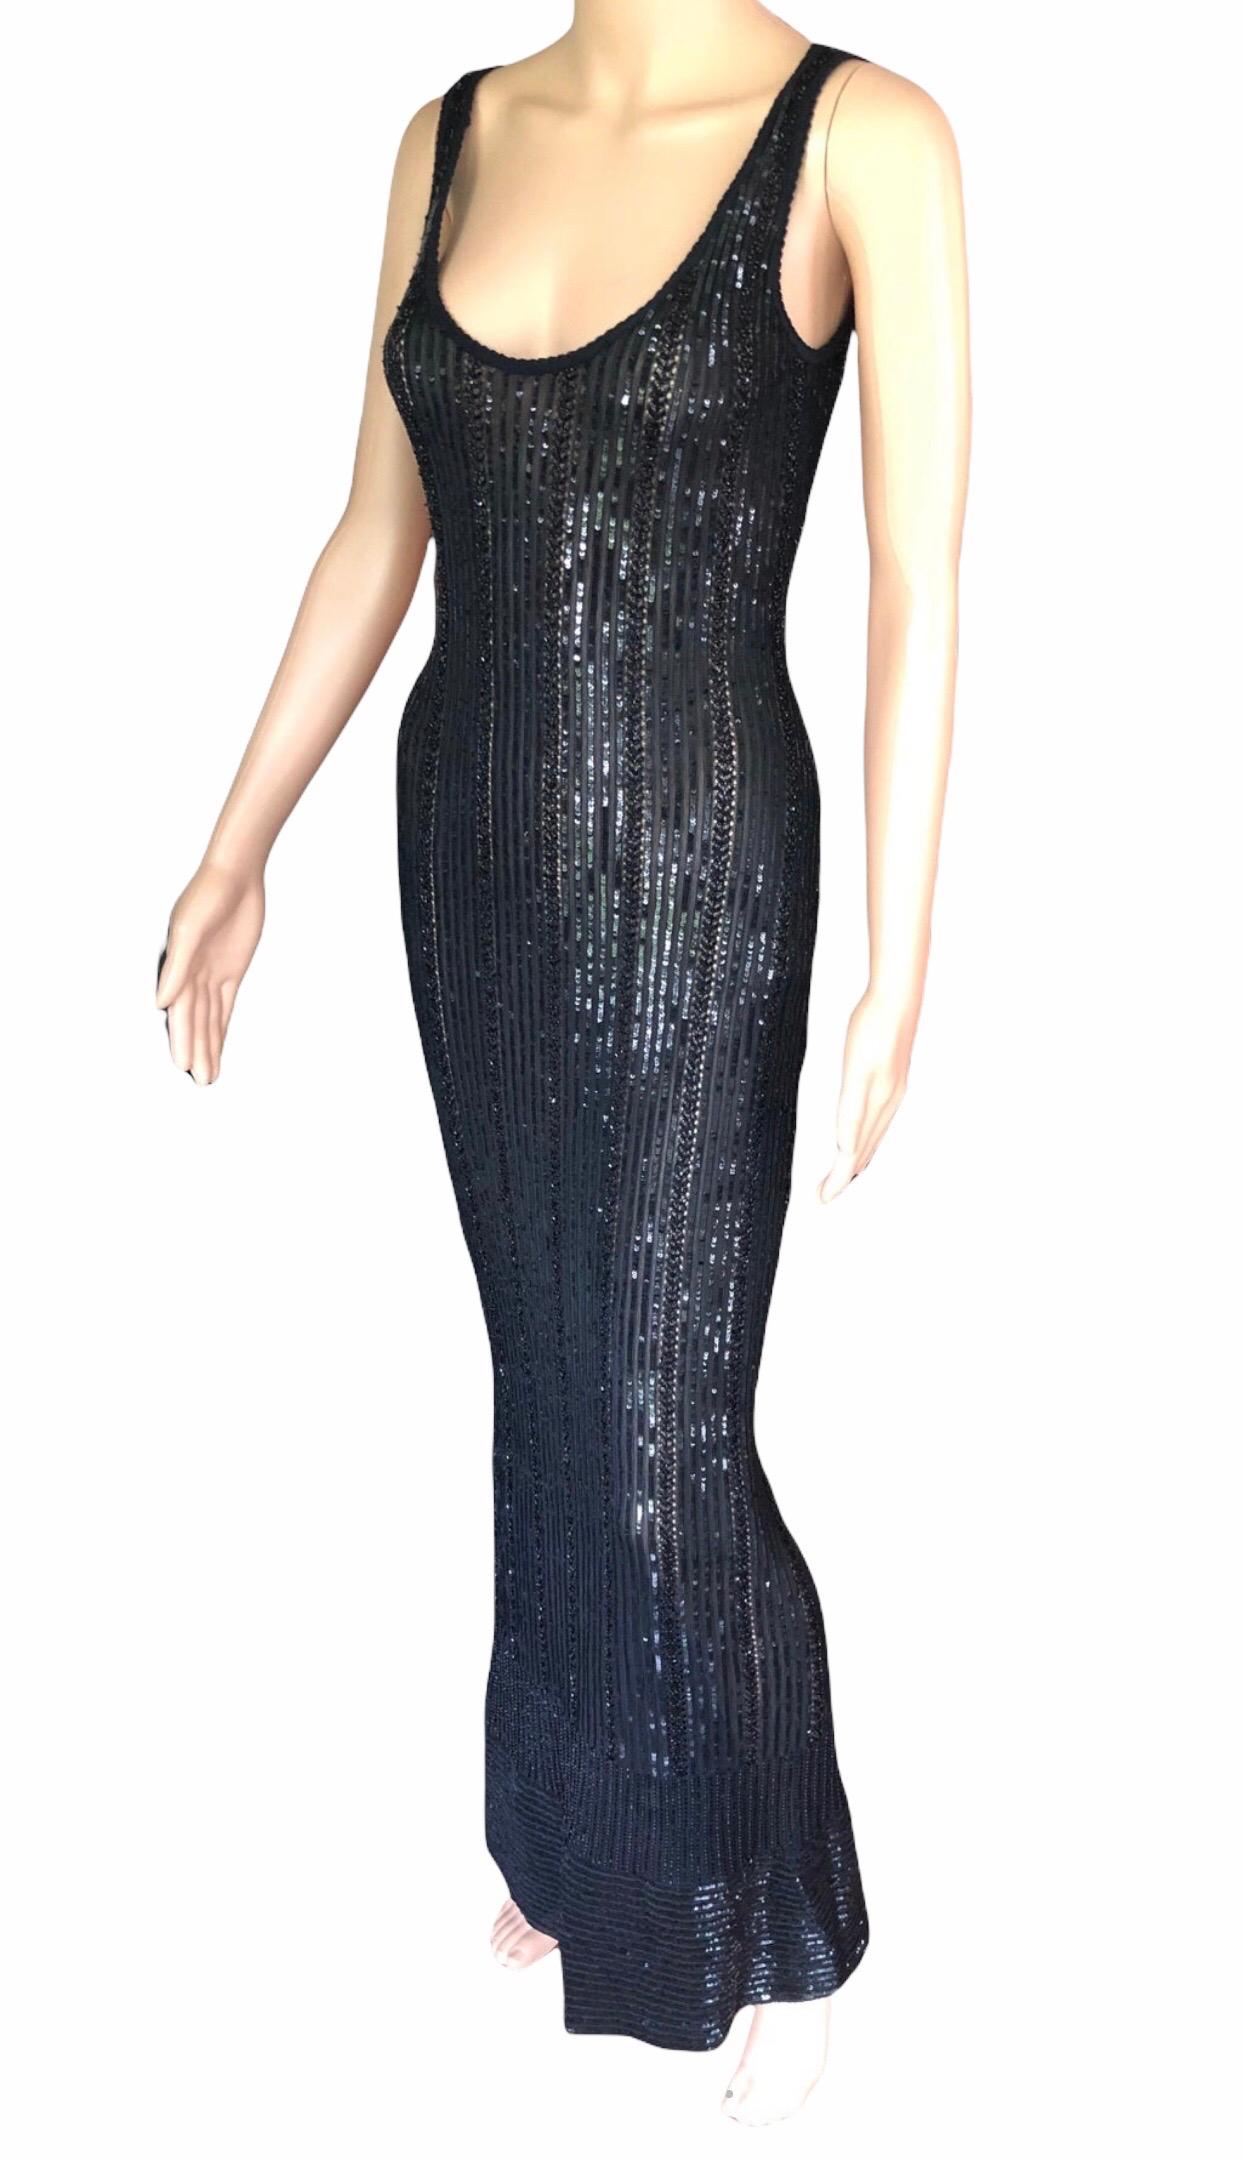 Azzedine Alaia Vintage S/S 1996 Runway Black Sequin Embellished Dress Gown 5